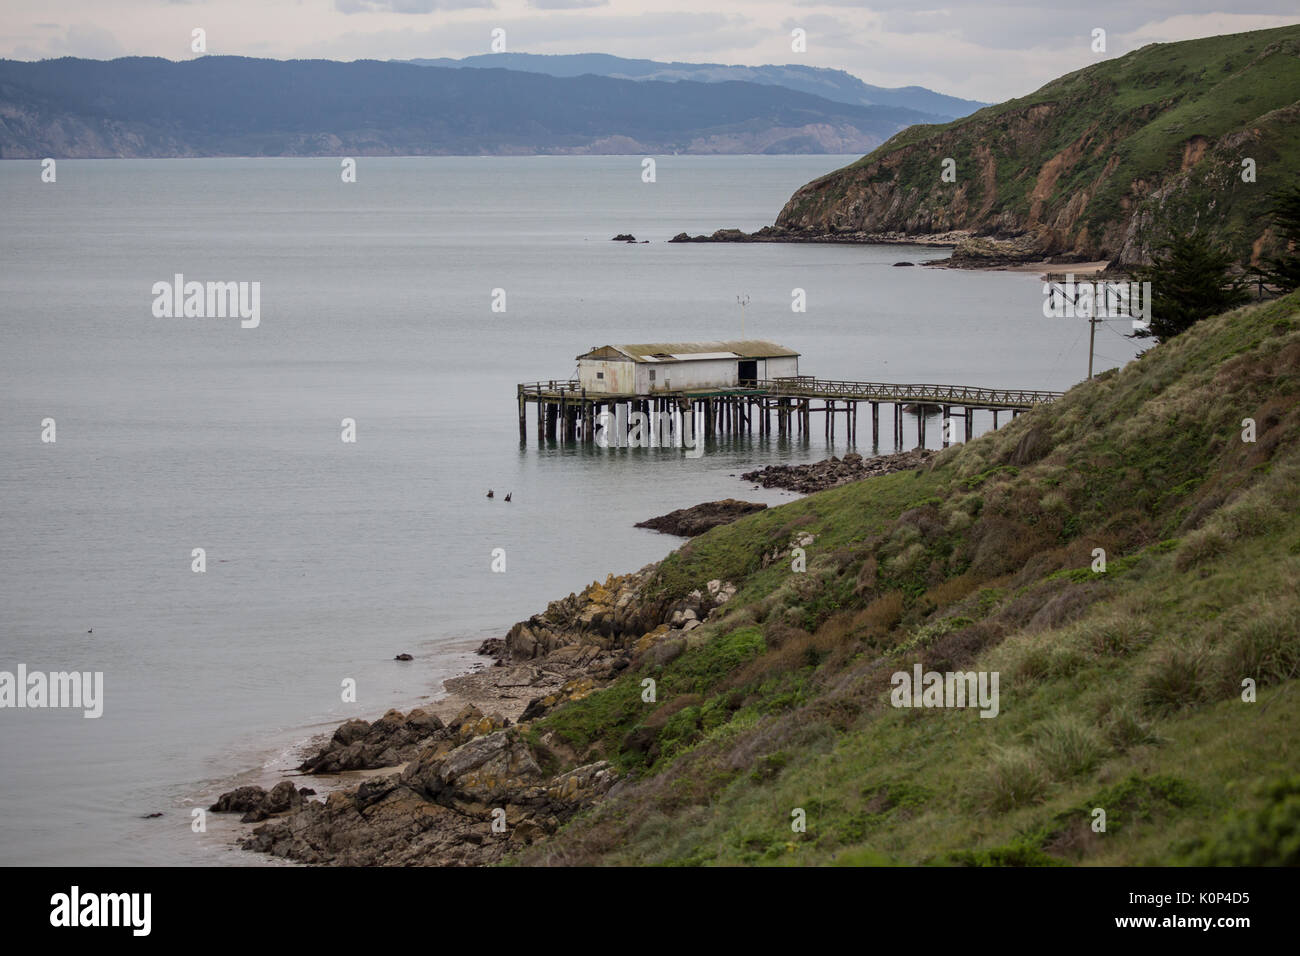 Fishing boat dock and processing shed juts out from rugged coastline at low tide Stock Photo